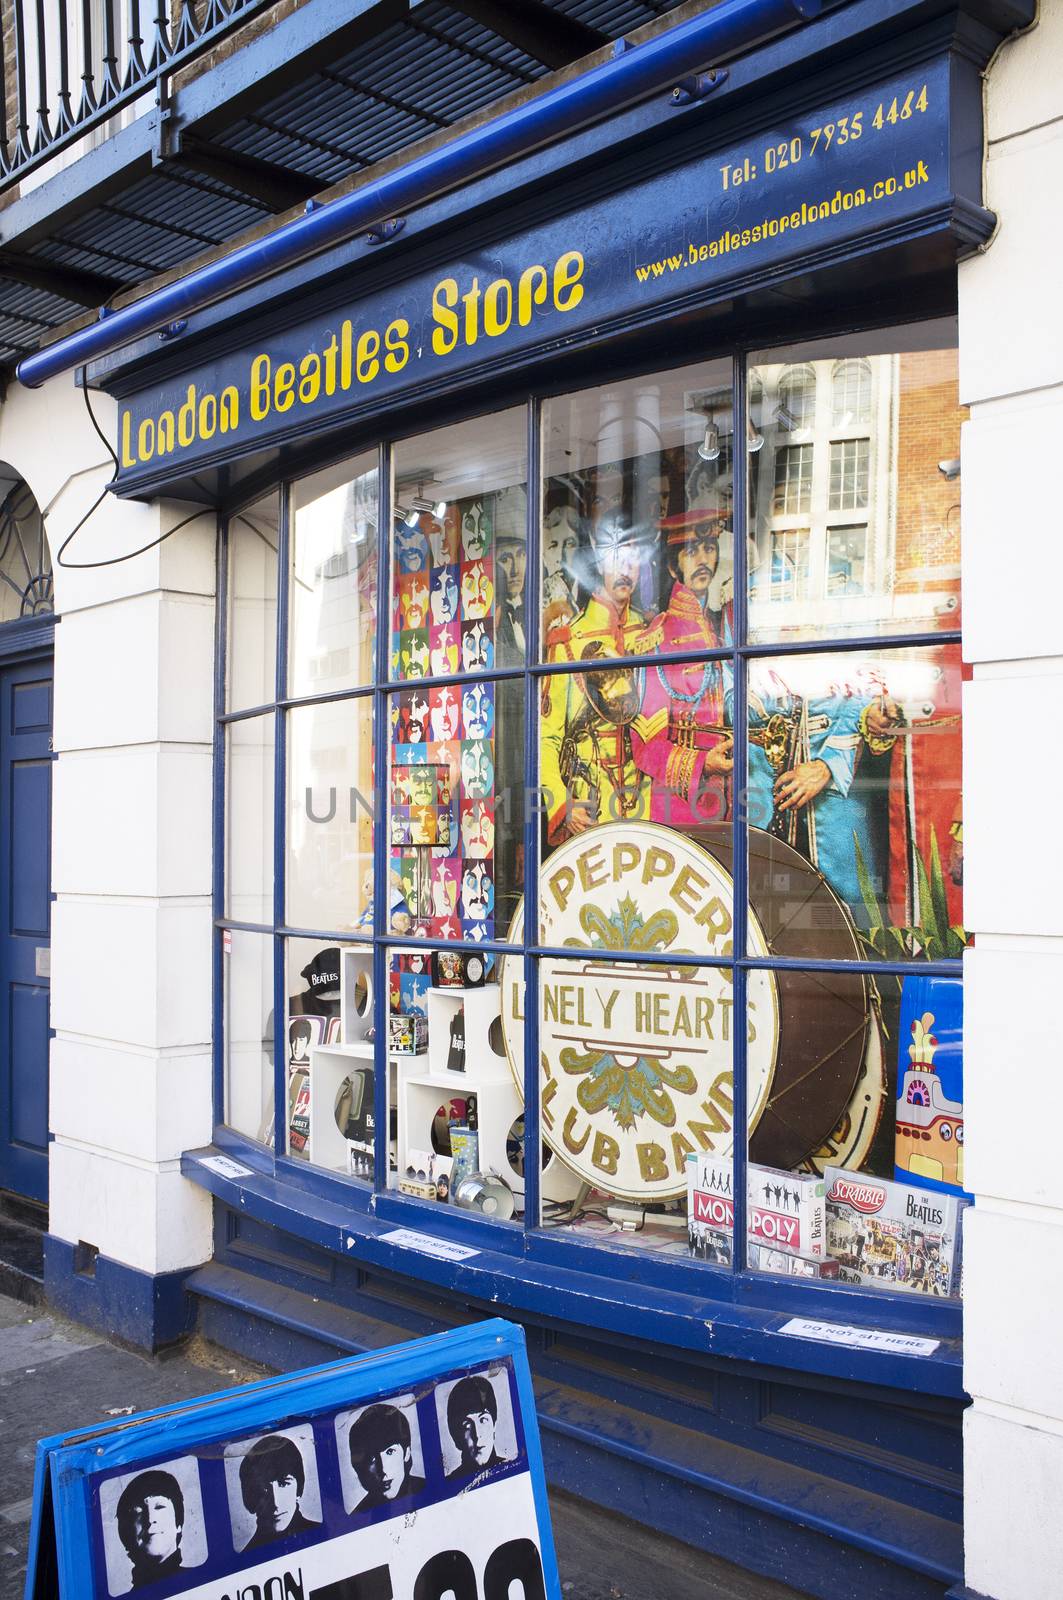 London Beatles Store by Stocksnapper